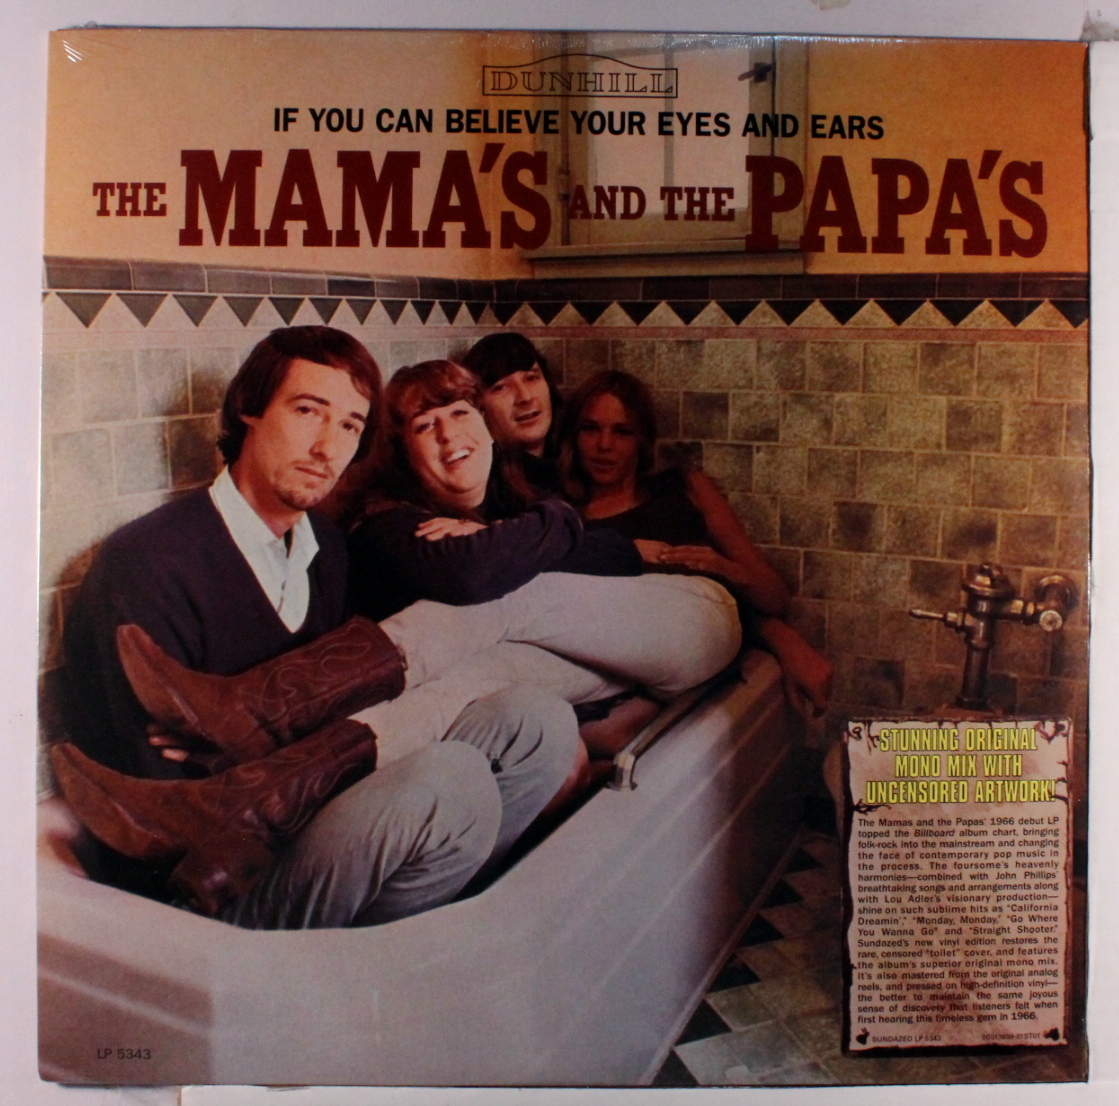 Can you believe this. The mamas & the Papas. The mamas and the Papas 1966. Mamas and Papas LP. The mamas the Papas 1966 the mamas the Papas.